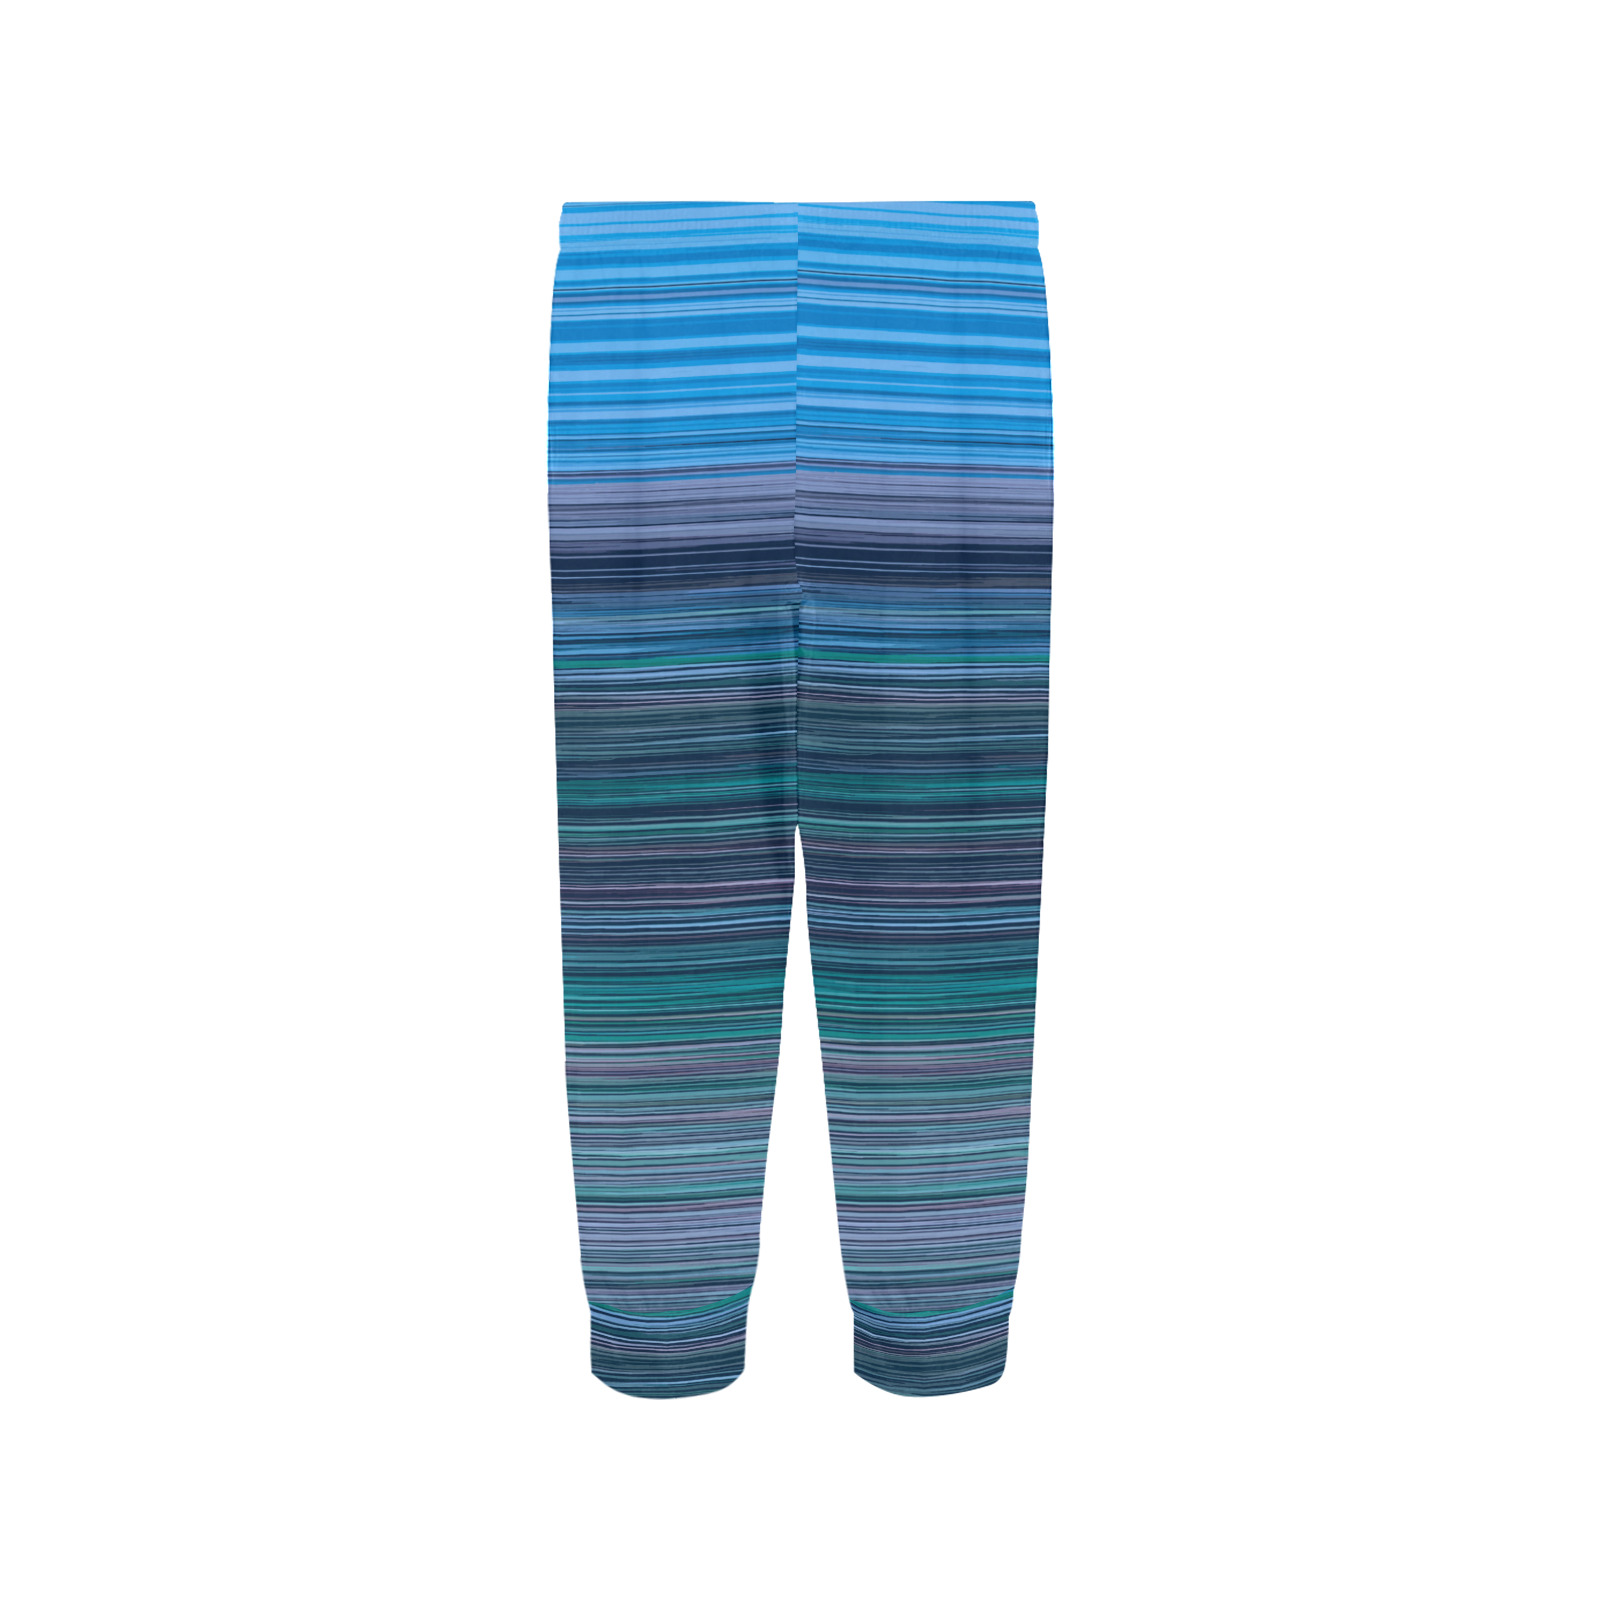 Abstract Blue Horizontal Stripes Women's All Over Print Pajama Trousers